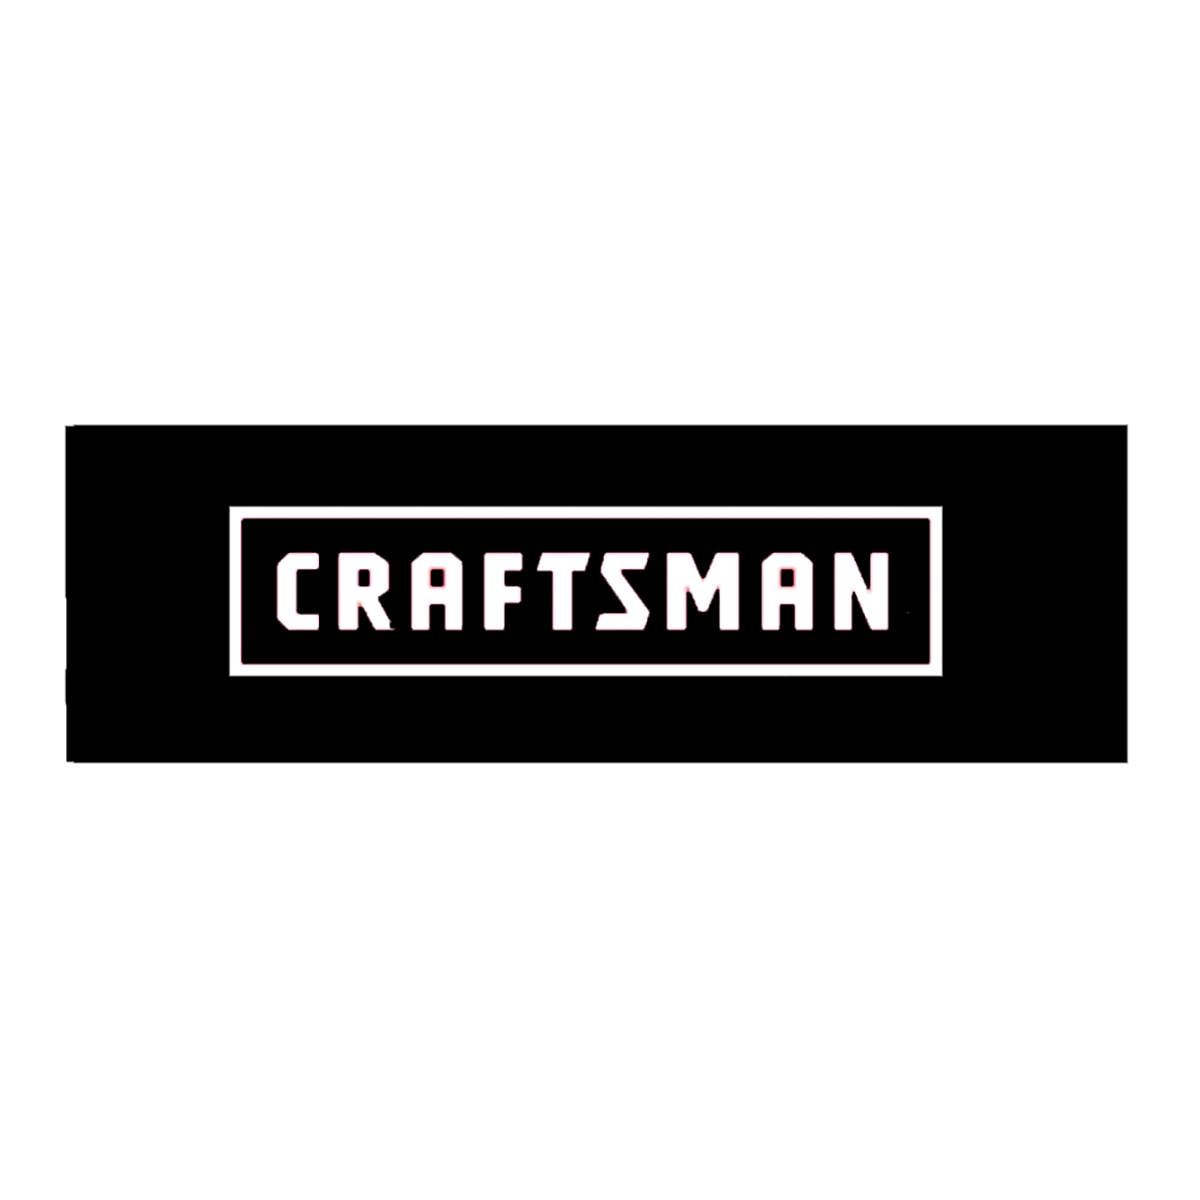 Unrivaled works with industrial clients like Craftsman and is based in New York City.